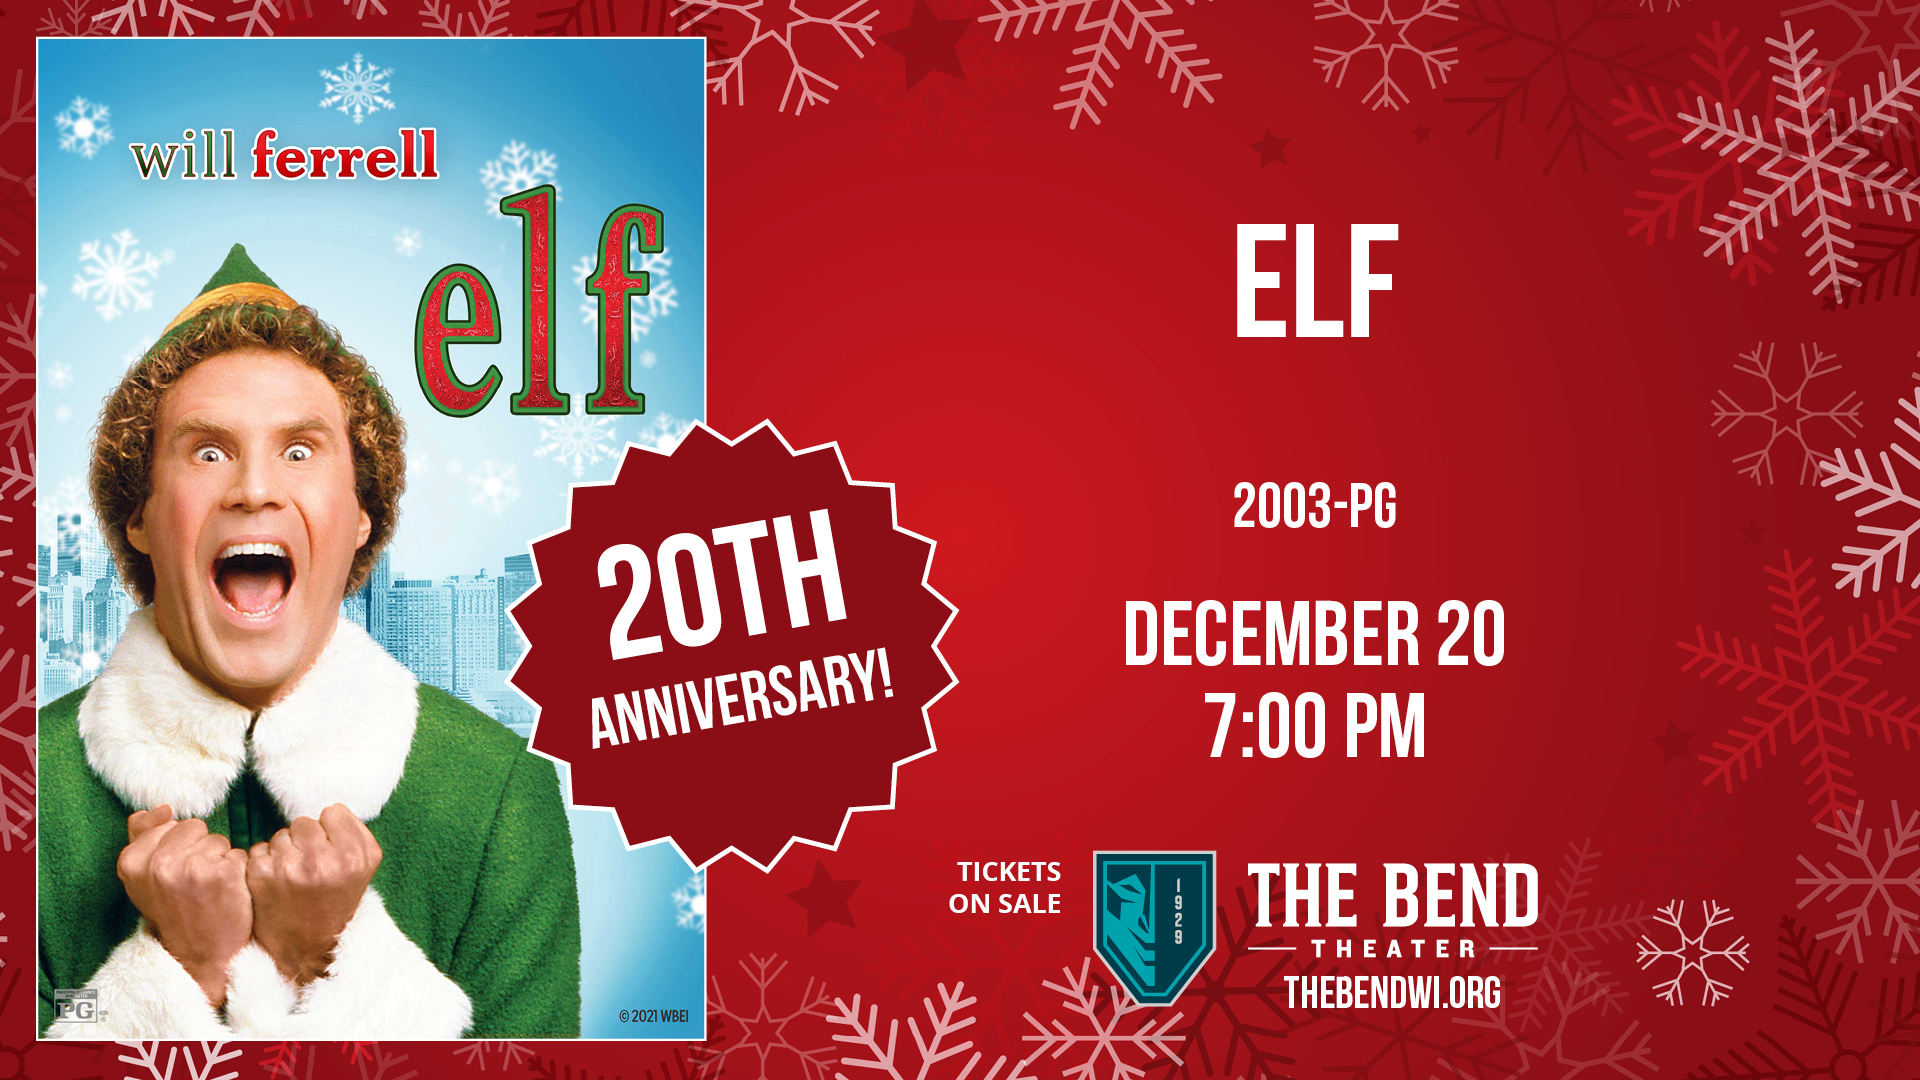 Elf at The Bend Theater